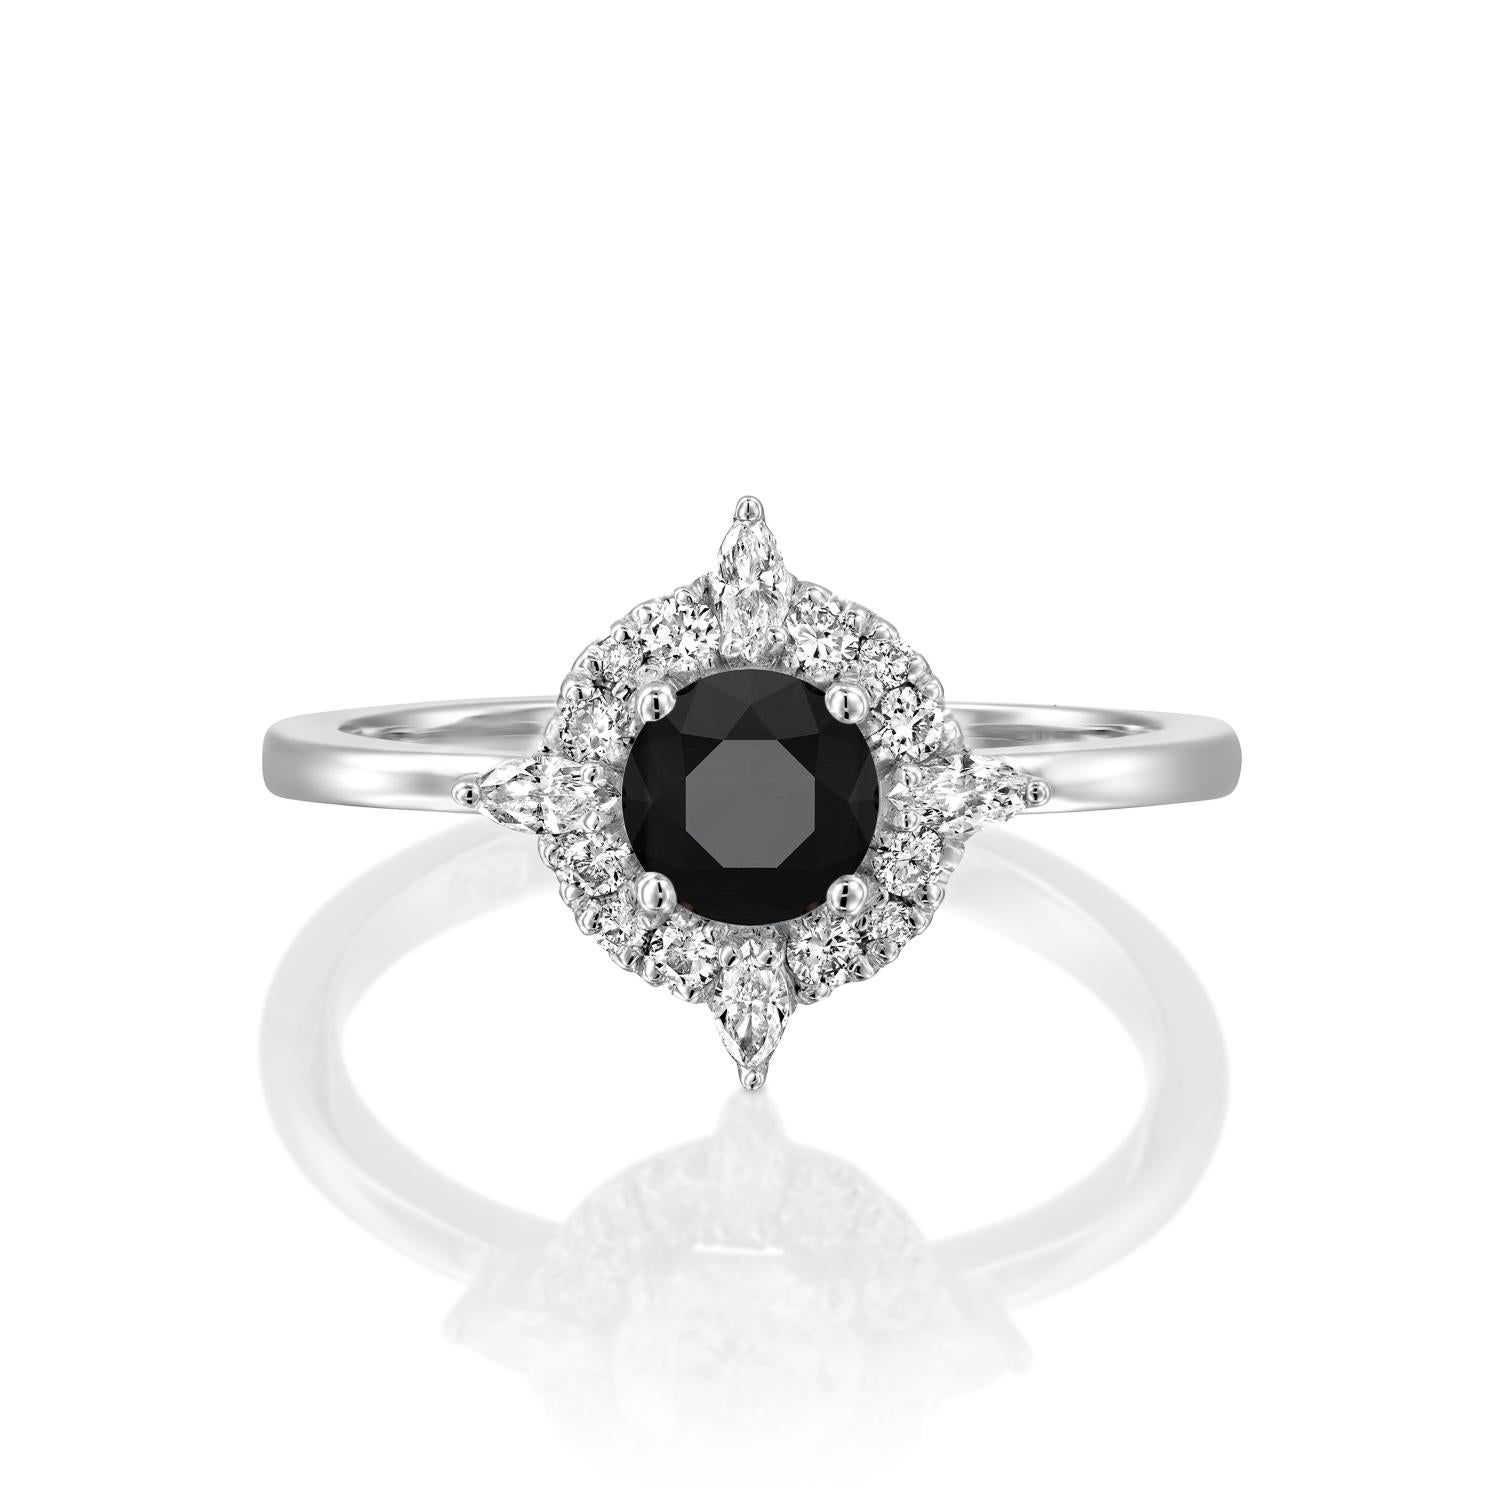 Beautiful solitaire with accents Victorian style diamond engagement ring. Center stone is natural, round shaped, AAA quality Black Diamond of 0.5 carat and it is surrounded by smaller natural round diamonds approx. 0.25 total carat weight. The total